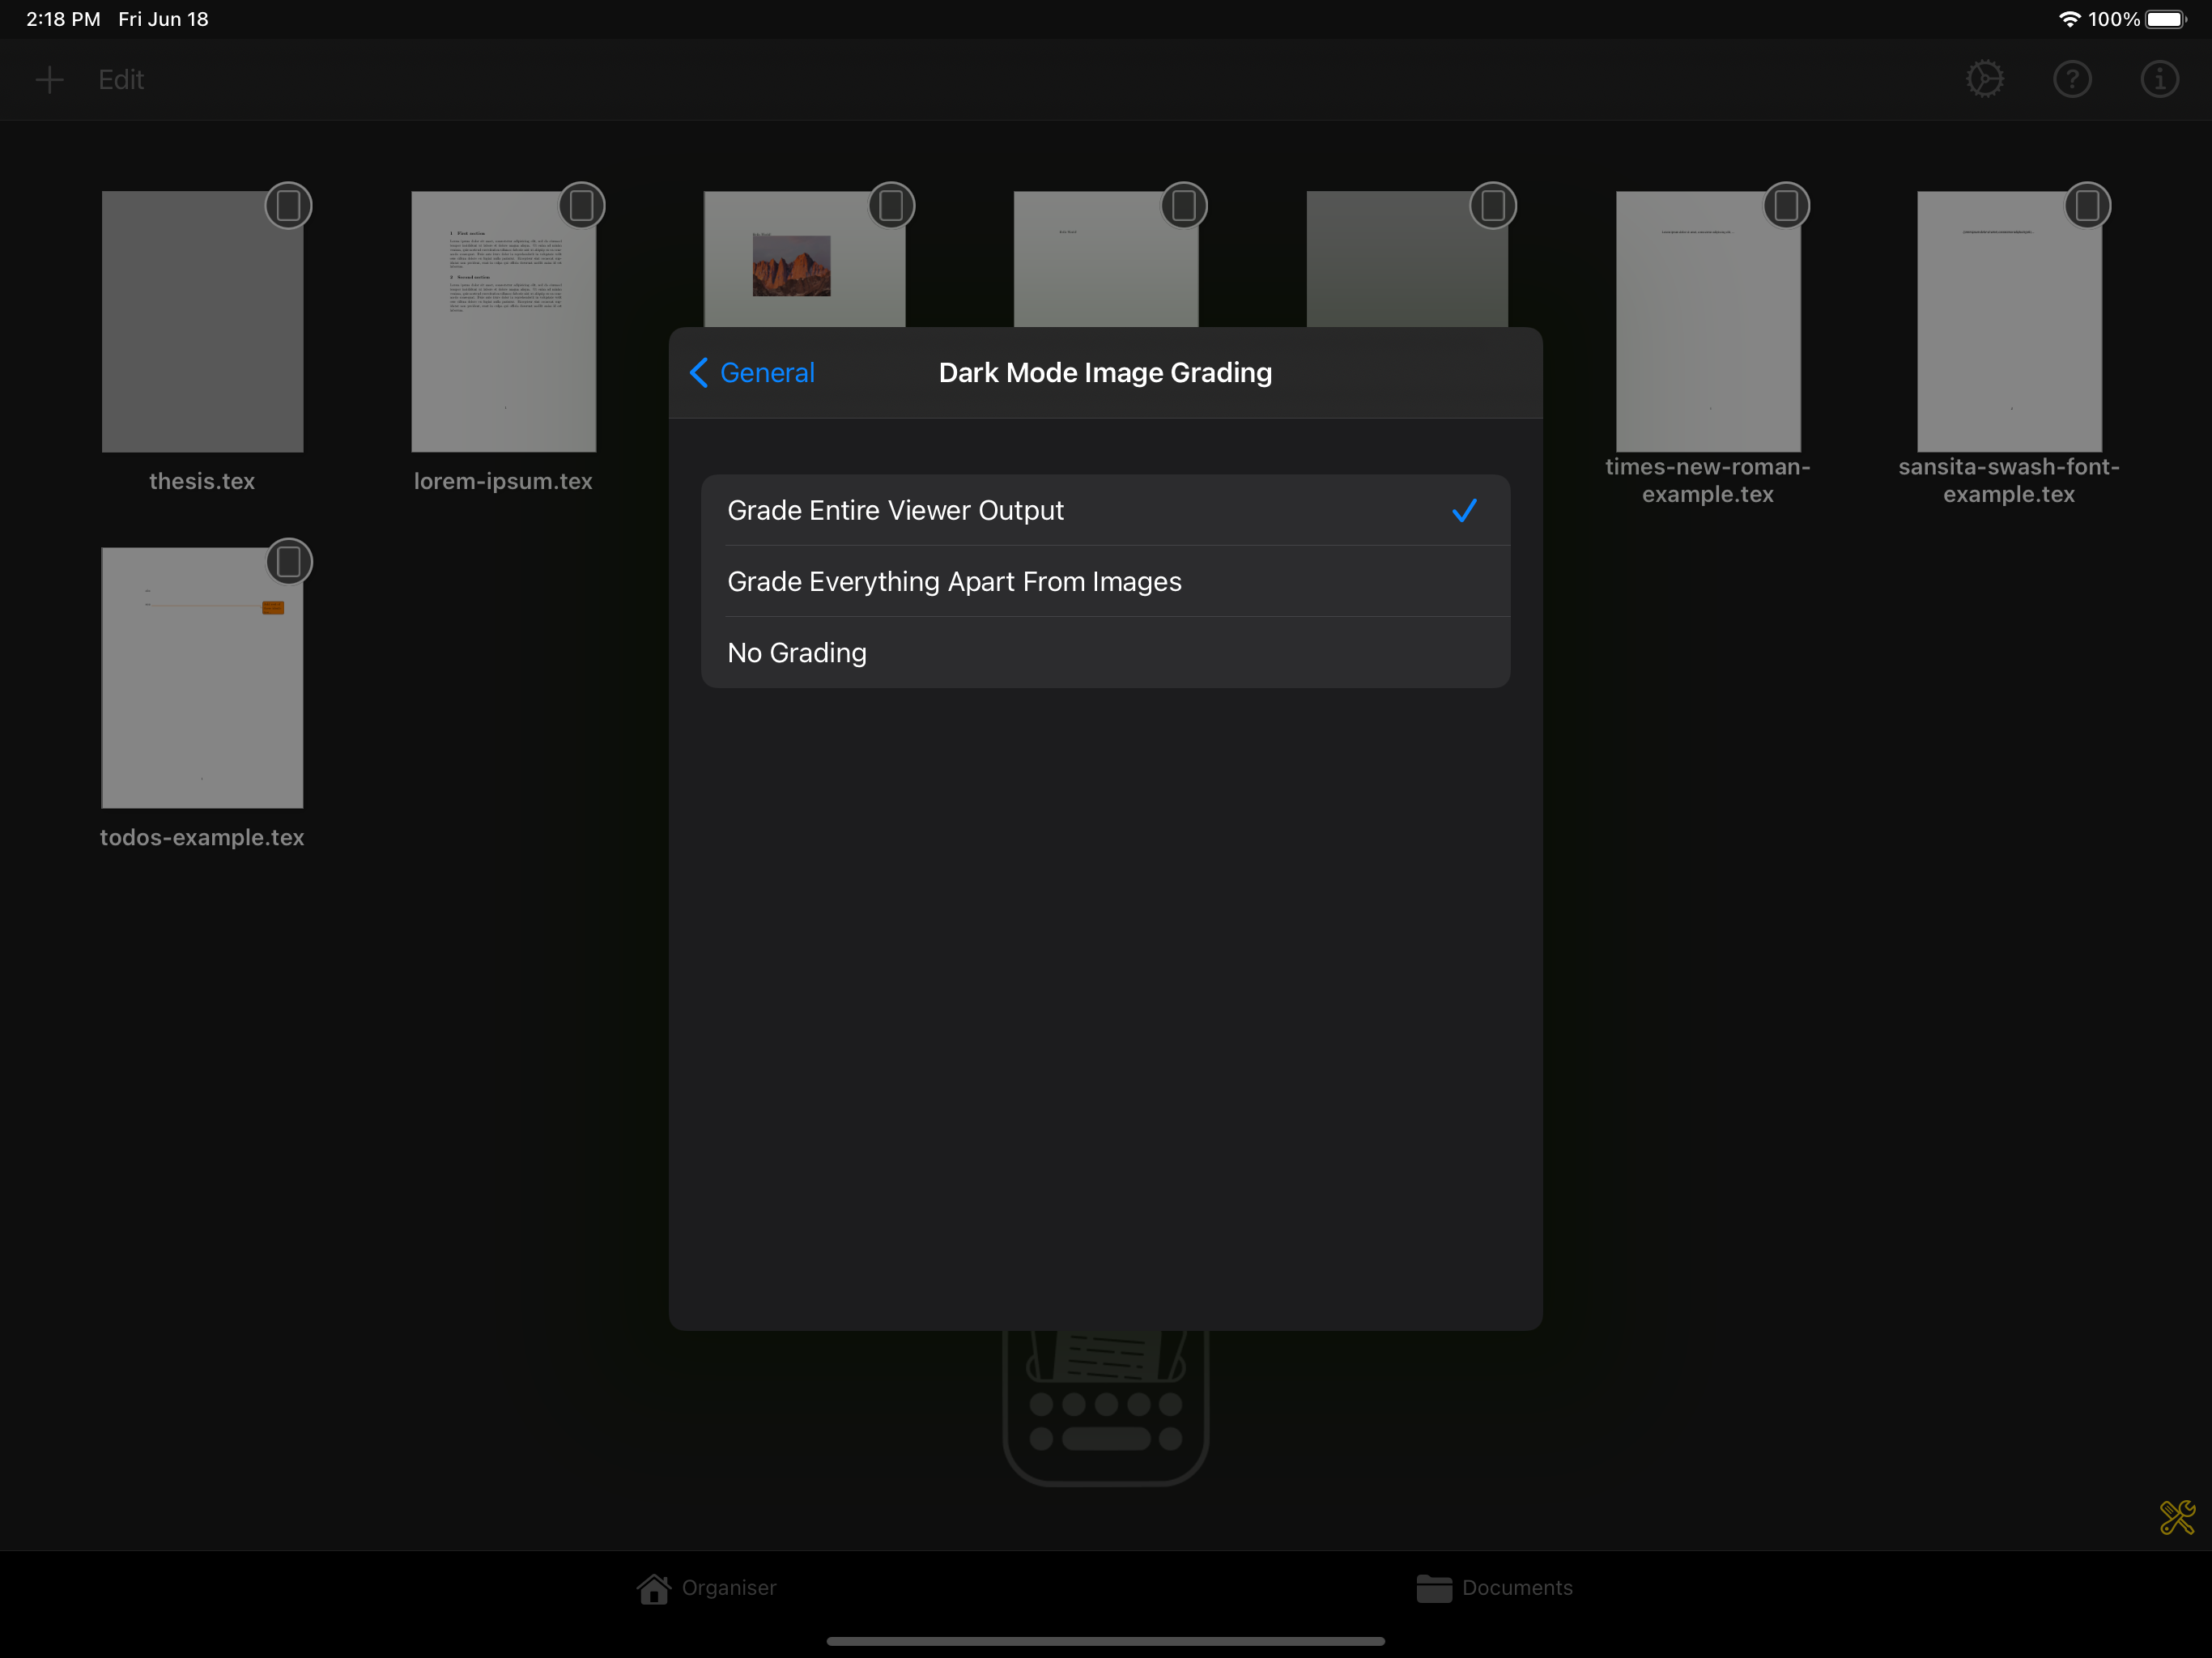 docs/apps/workspace/document-viewer/grading/global-grading-options-dark-mode_ios_ipad.png